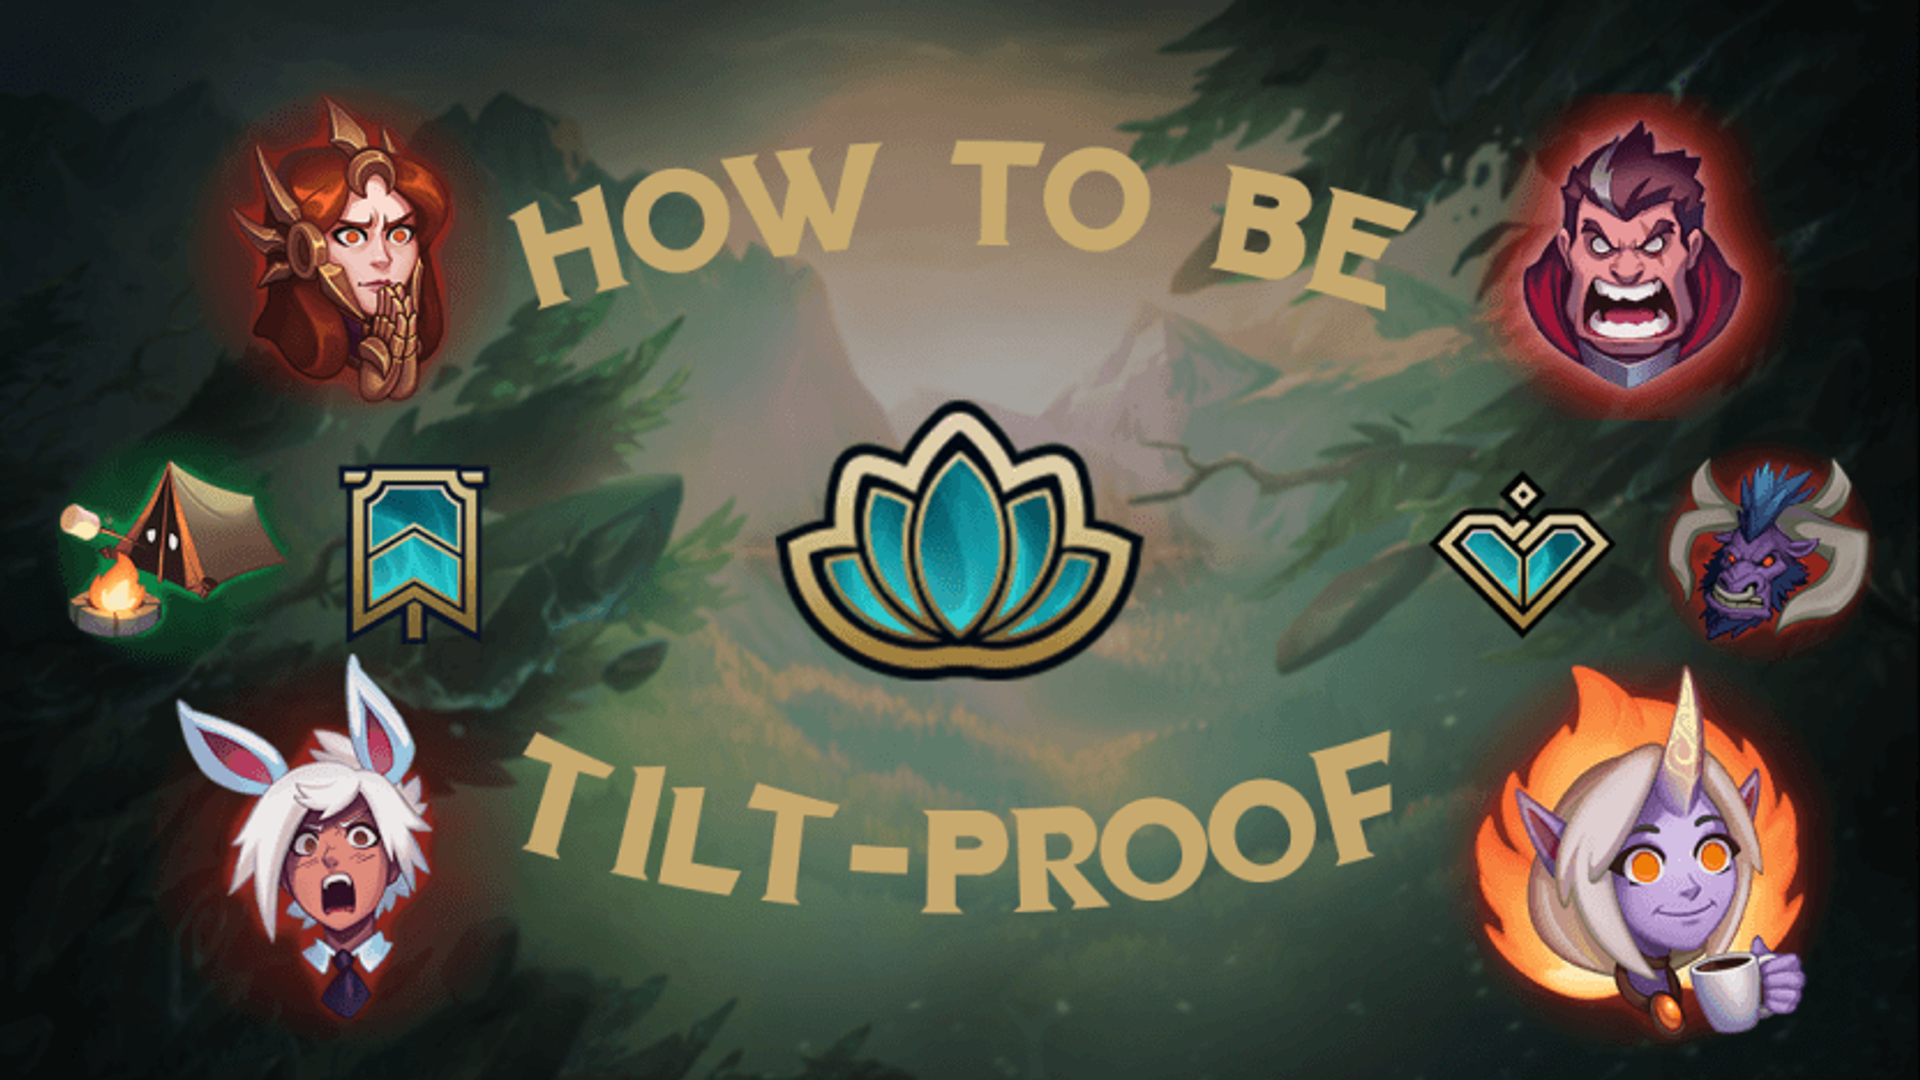 Tips and Tricks on How to be Tilt-Proof